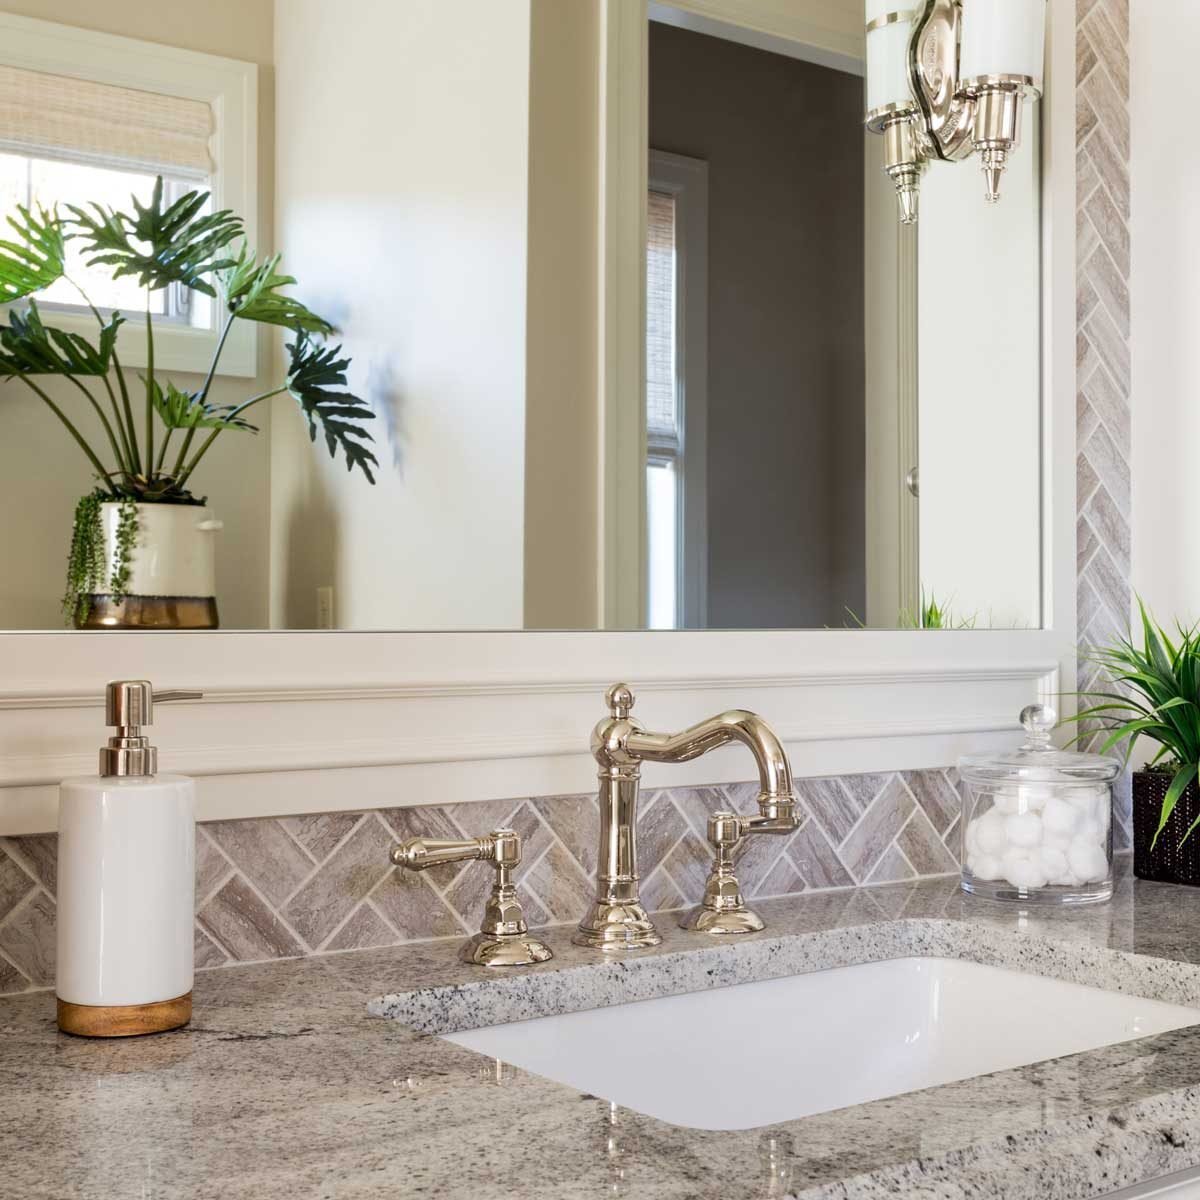 https://www.familyhandyman.com/wp-content/uploads/2021/04/bathroom-counter-square-GettyImages-484490250.jpg